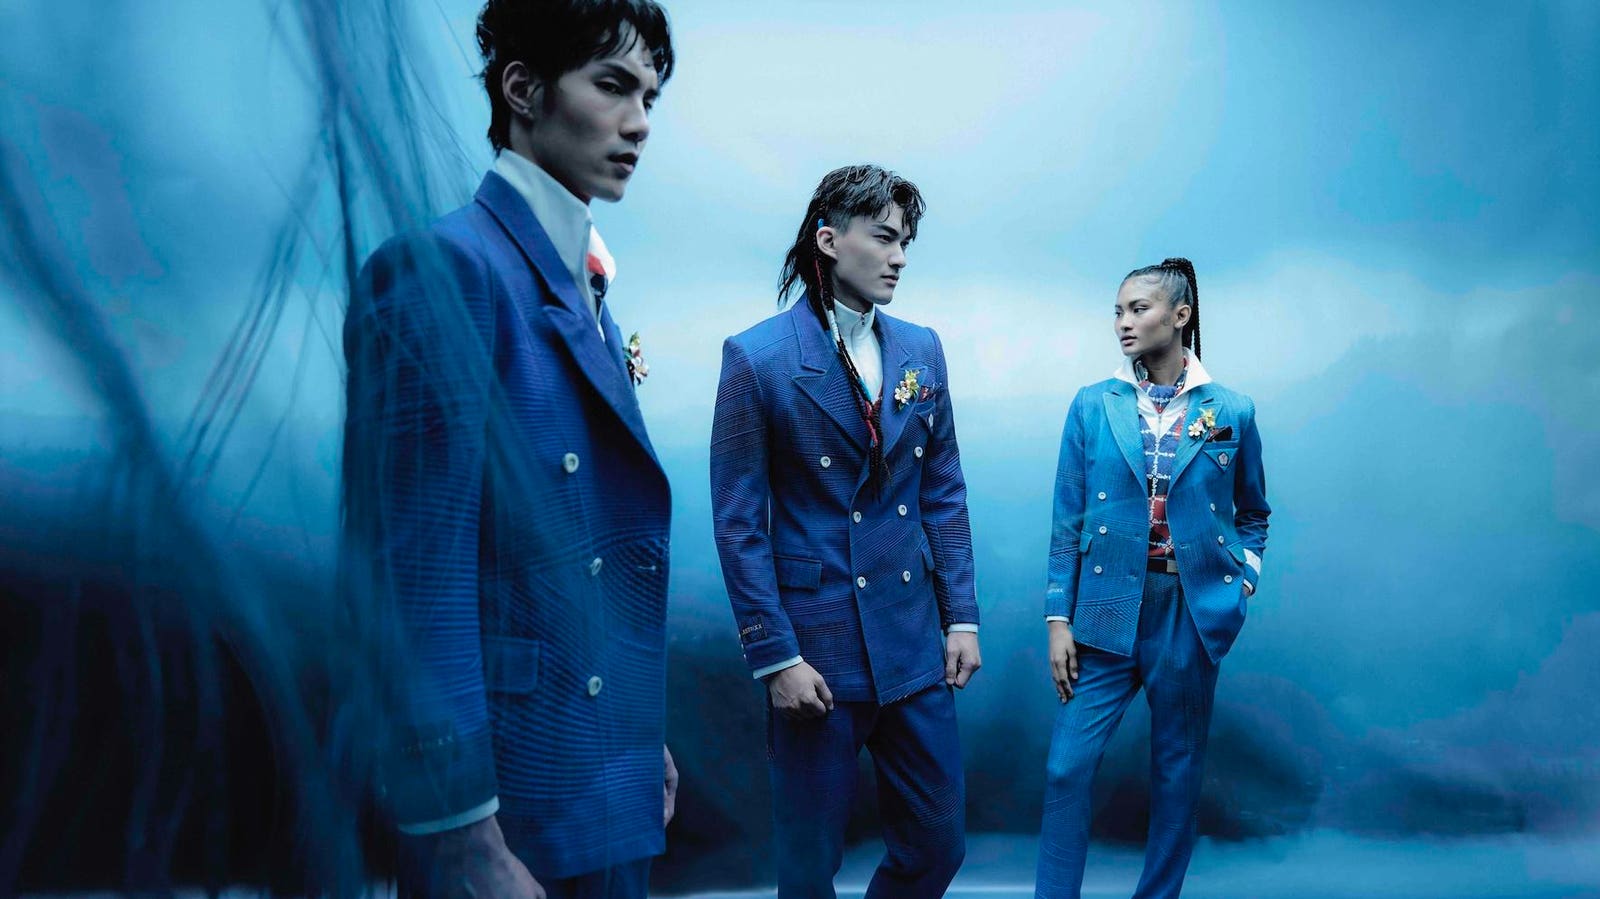 Summer Olympics 2024: 10 Of The Most Stylish Uniforms From Paris Games